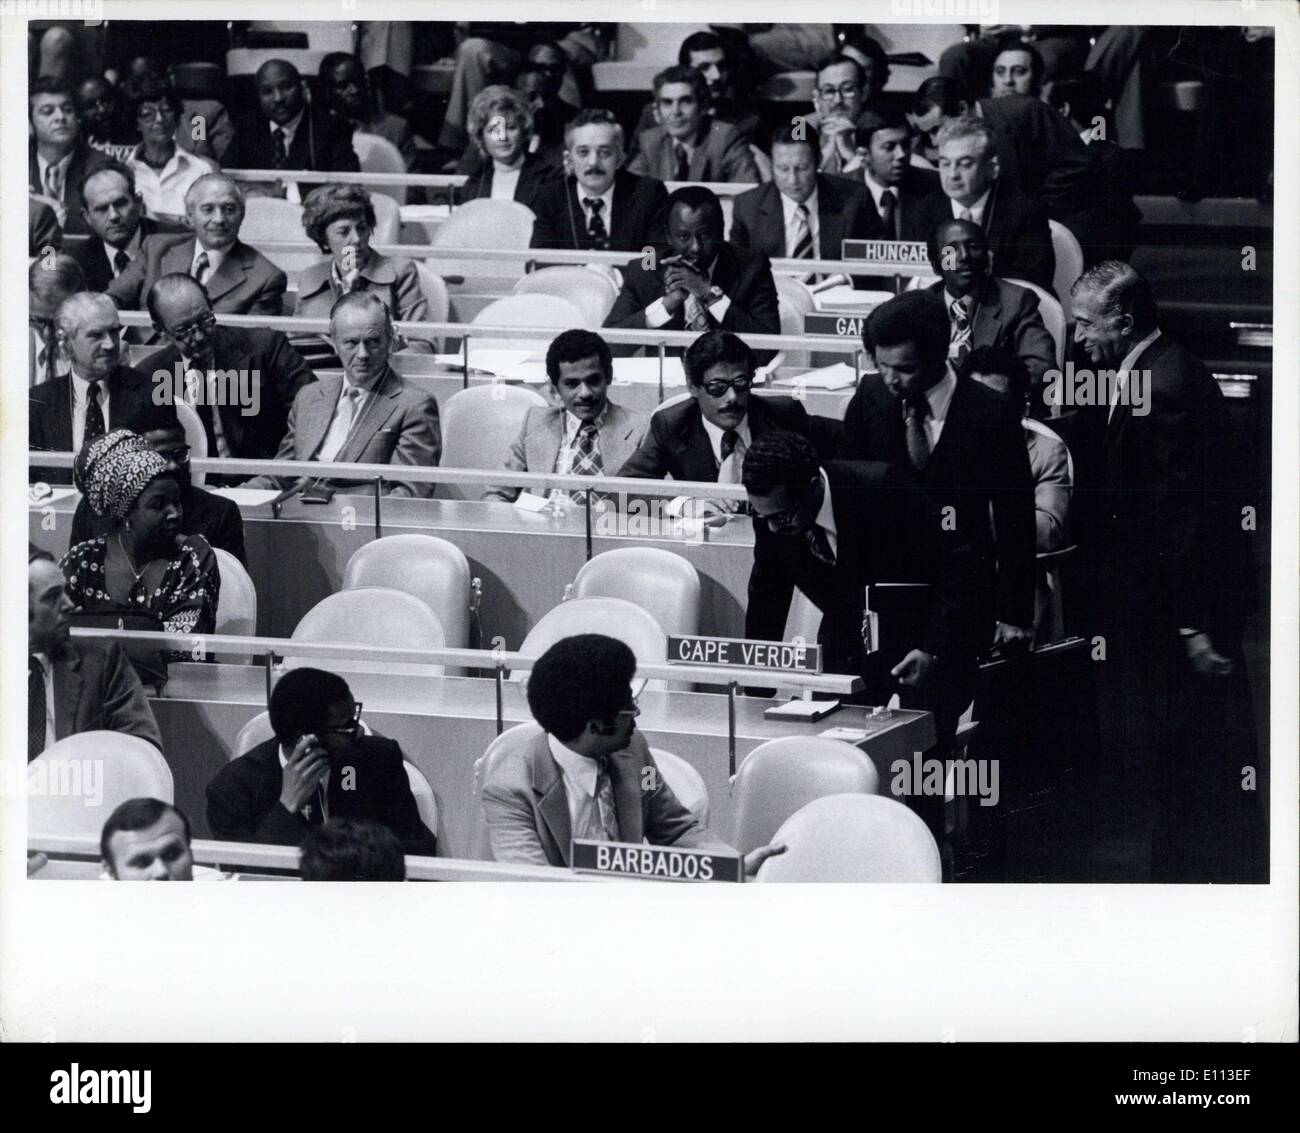 Sep. 16, 1975 - (GA:30:IN) General Assembly Opens Thirteenth Regular Session Admits Three States to United Nations Membership. UN 128946 United Nations, New York, 16 September 1975. The General Assembly , opening its thirteenth regular session this afternoon, elected Gaston Thorn, Prime Minister and Foreign Minister of Lucenboug, as its President, and admitted three new Member States to the United Nations: Cape Verde, Seo Tome and Principe, and Mozambique, The Organization now has 141 members Stock Photo